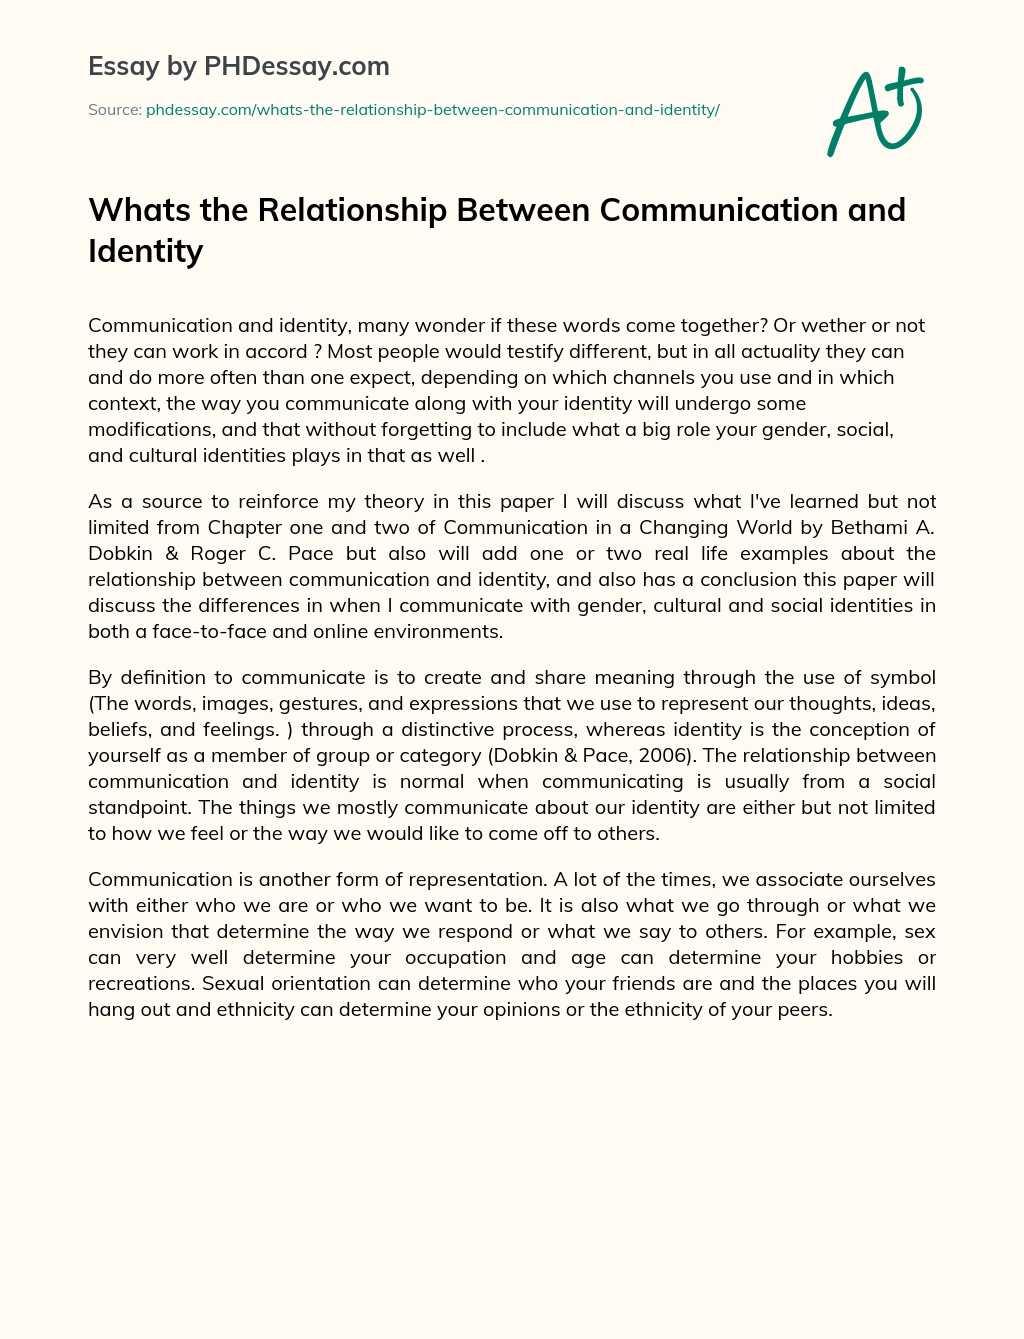 Whats the Relationship Between Communication and Identity essay